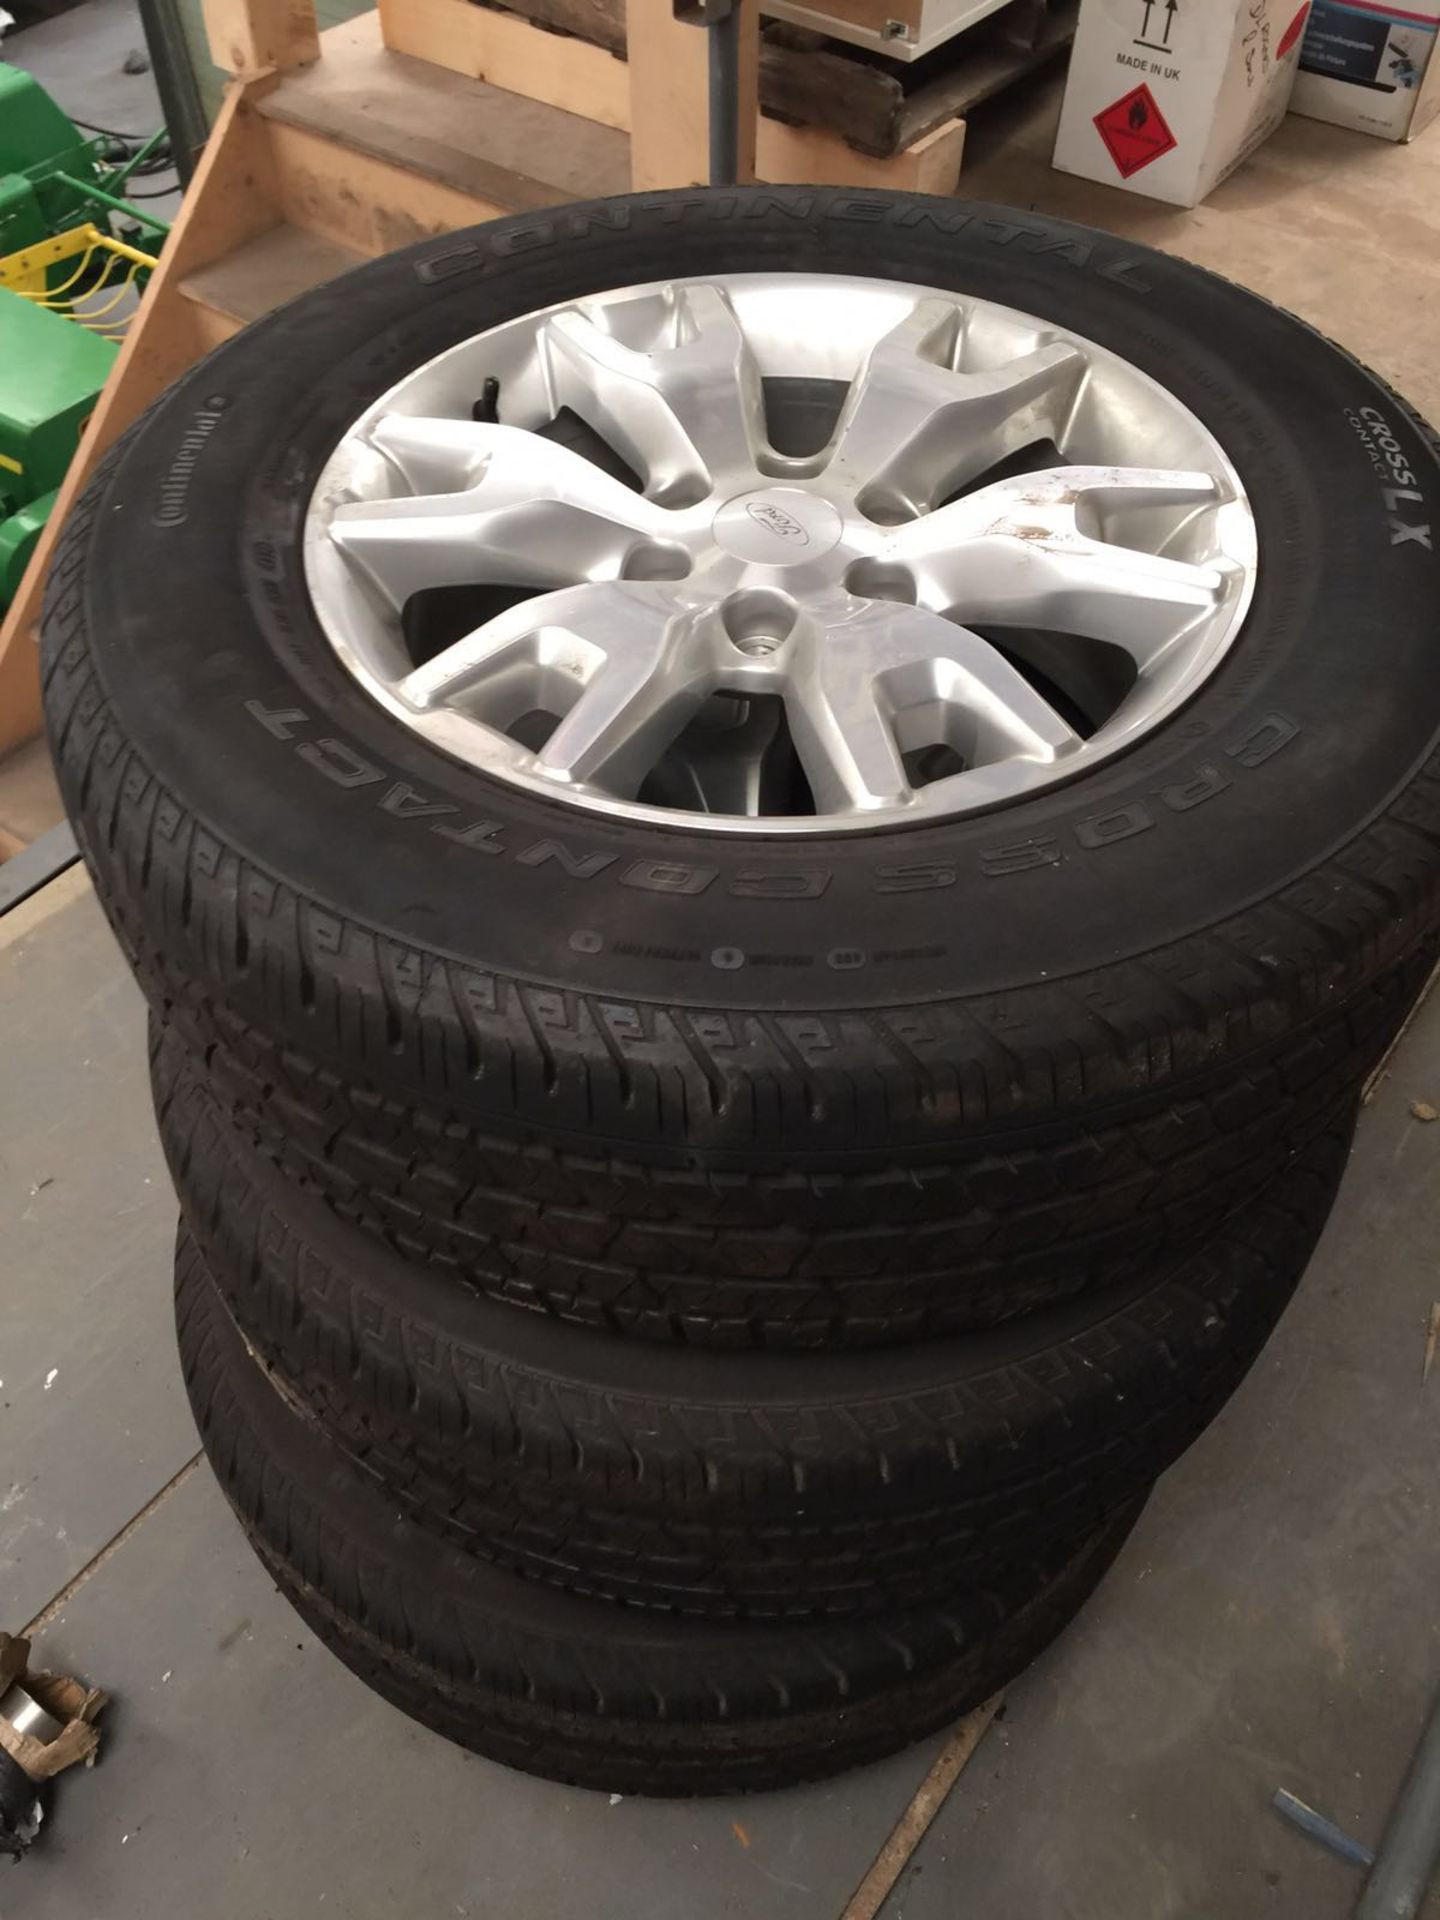 SET OF 4 2016 18" FORD RANGER ALLOY WHEELS WITH CONTINENTAL CROSS CONTACT TYRES ONLY 100 MILES - Image 3 of 5